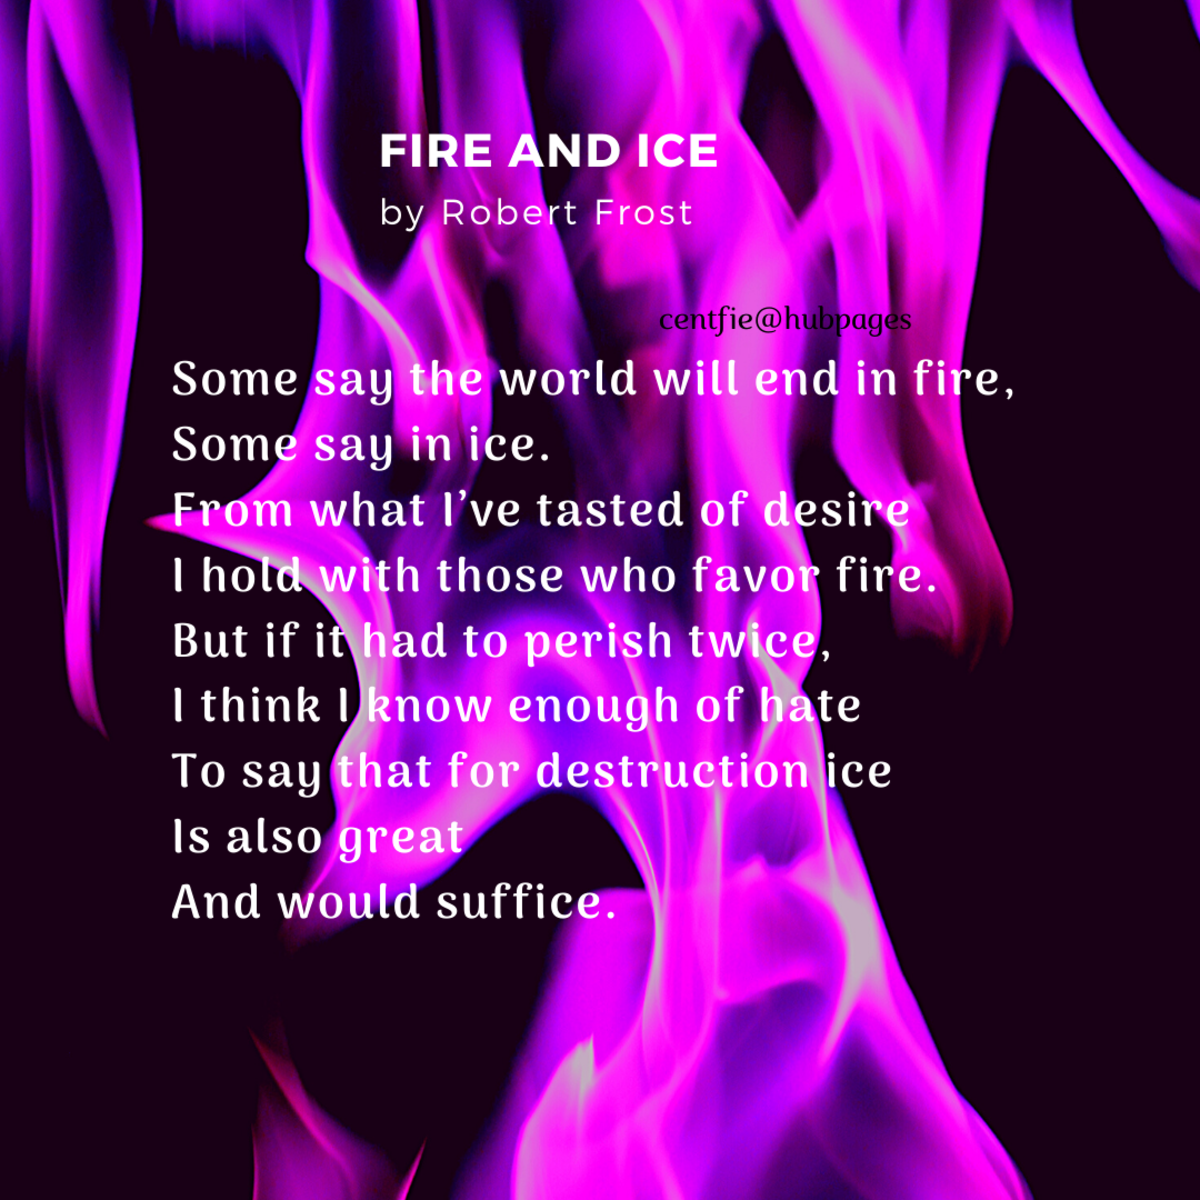 an-end-of-the-world-poem-by-robert-frost-fire-and-ice